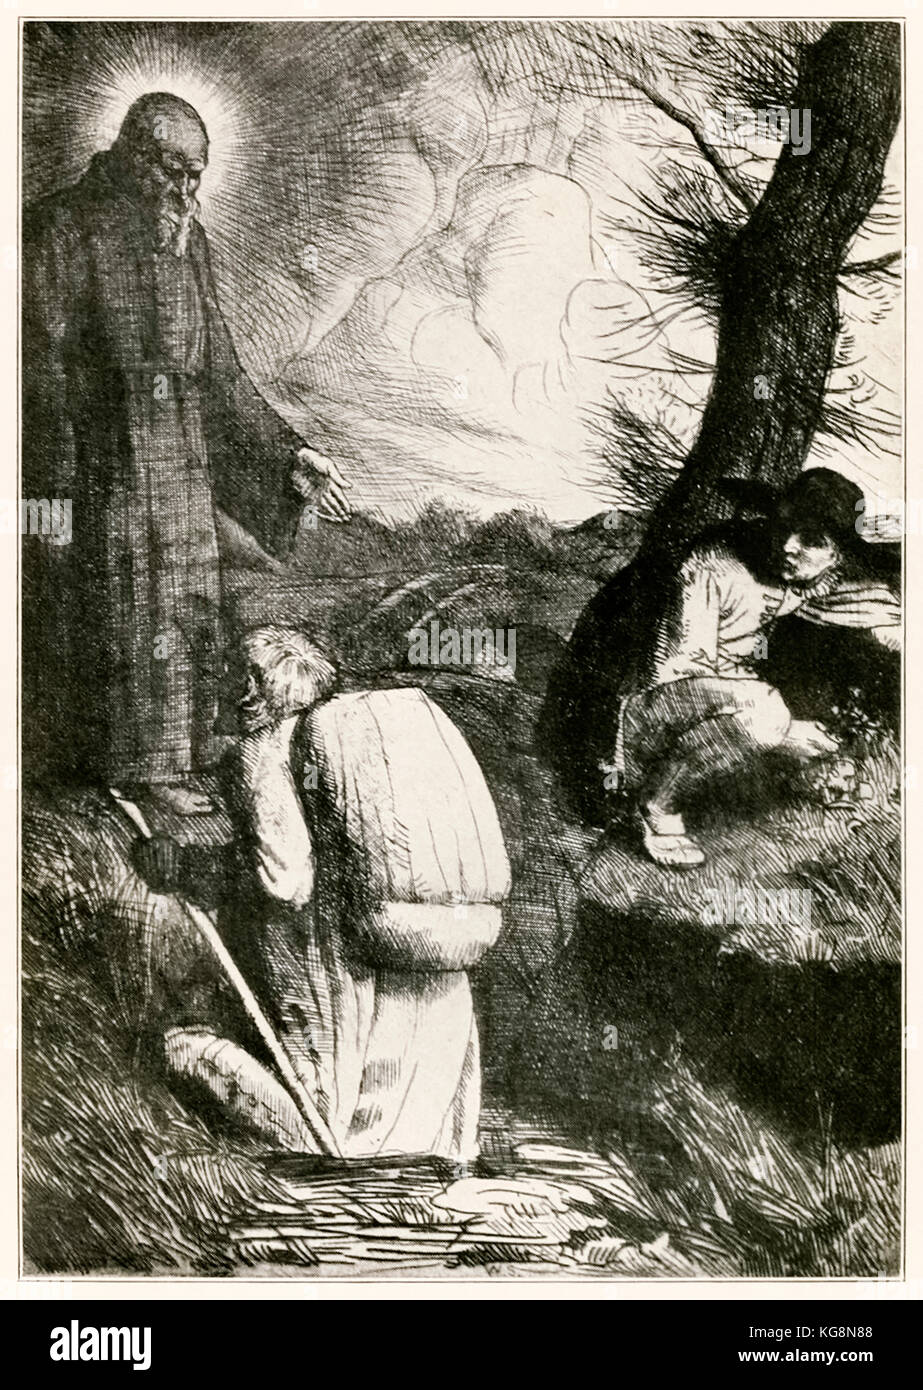 “Christian is troubled” frontispiece from ‘The Pilgrim’s Progress From This World, To That Which Is To Come’ by John Bunyan (1628-1688) illustration by William Strang (1859-1921). Christian struggles under the weight of his sins and his guilt in the Slough of Despond. See more information below. Stock Photo